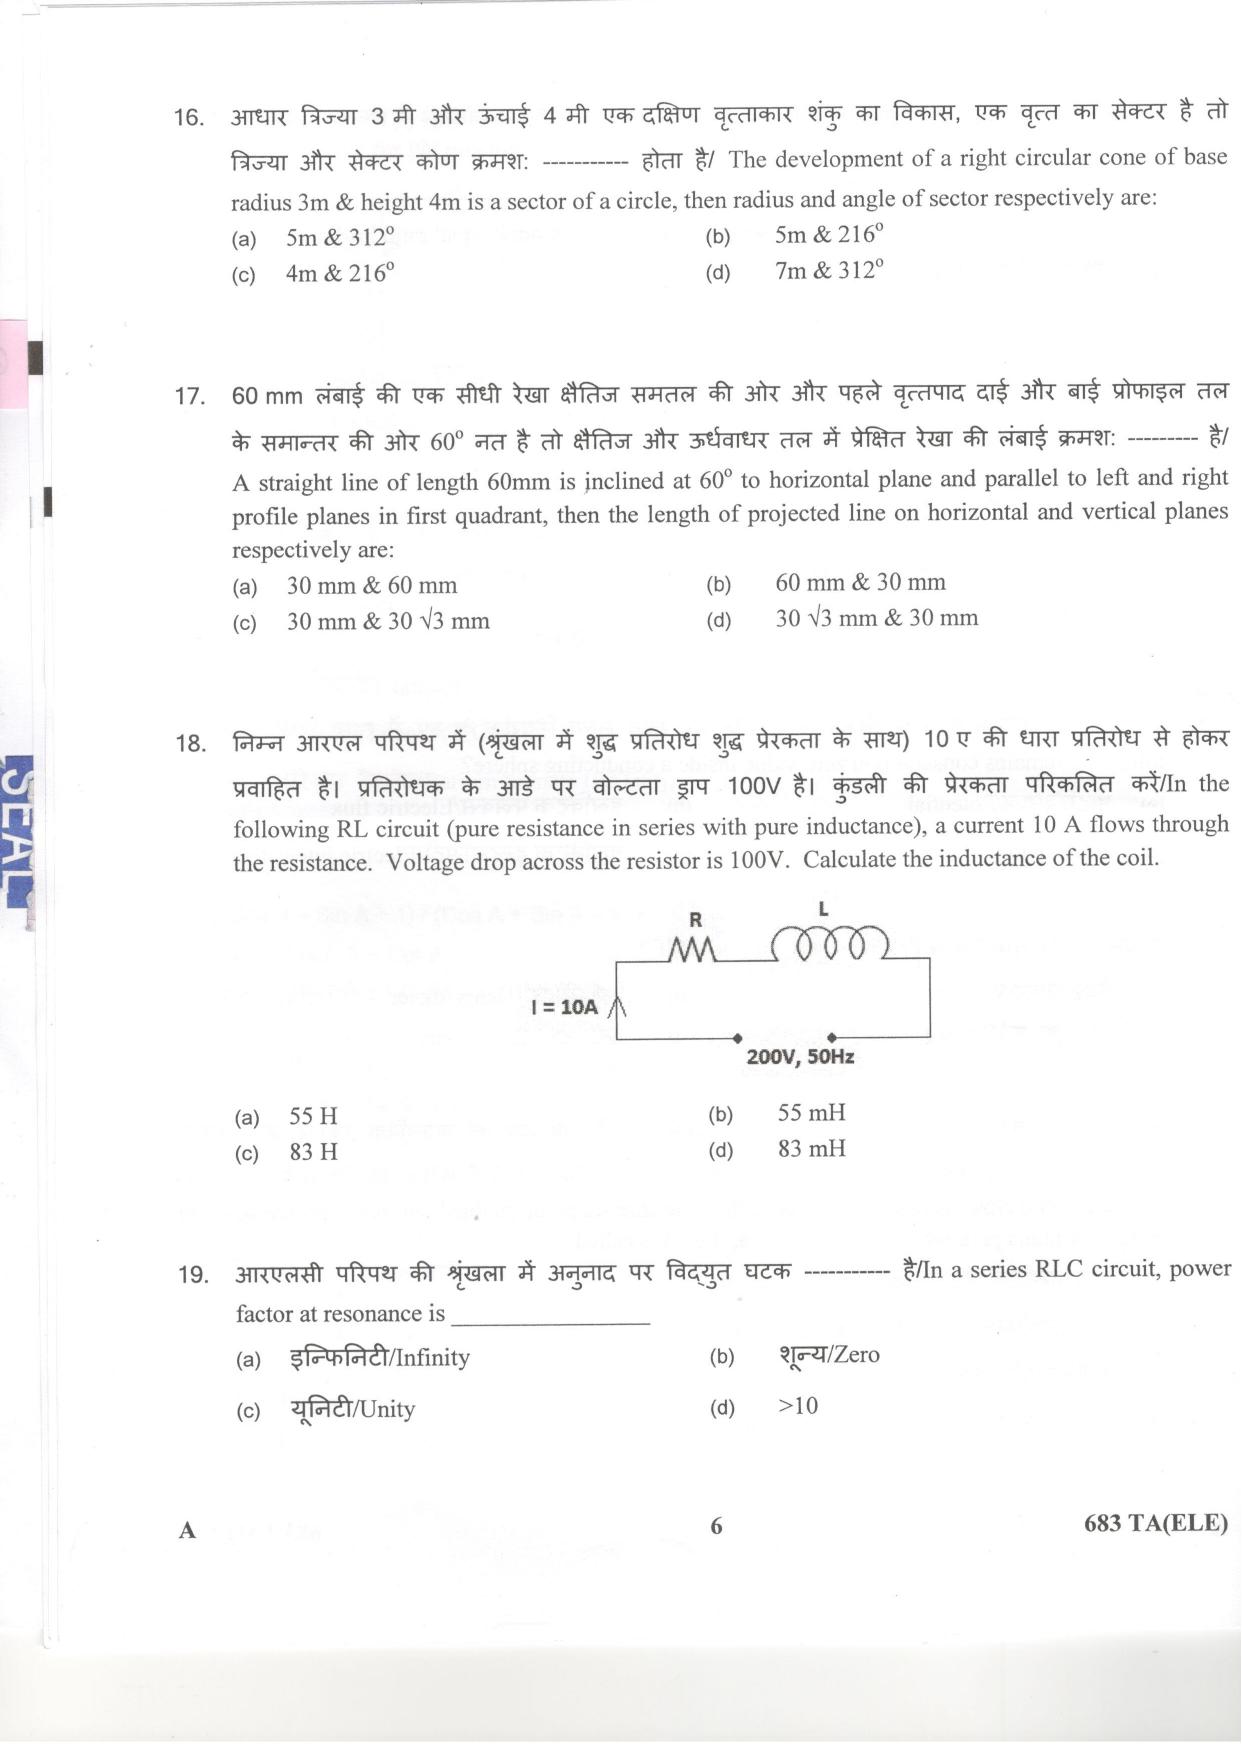 LPSC Technical Assistant (Electrical) 2018 Question Paper - Page 6